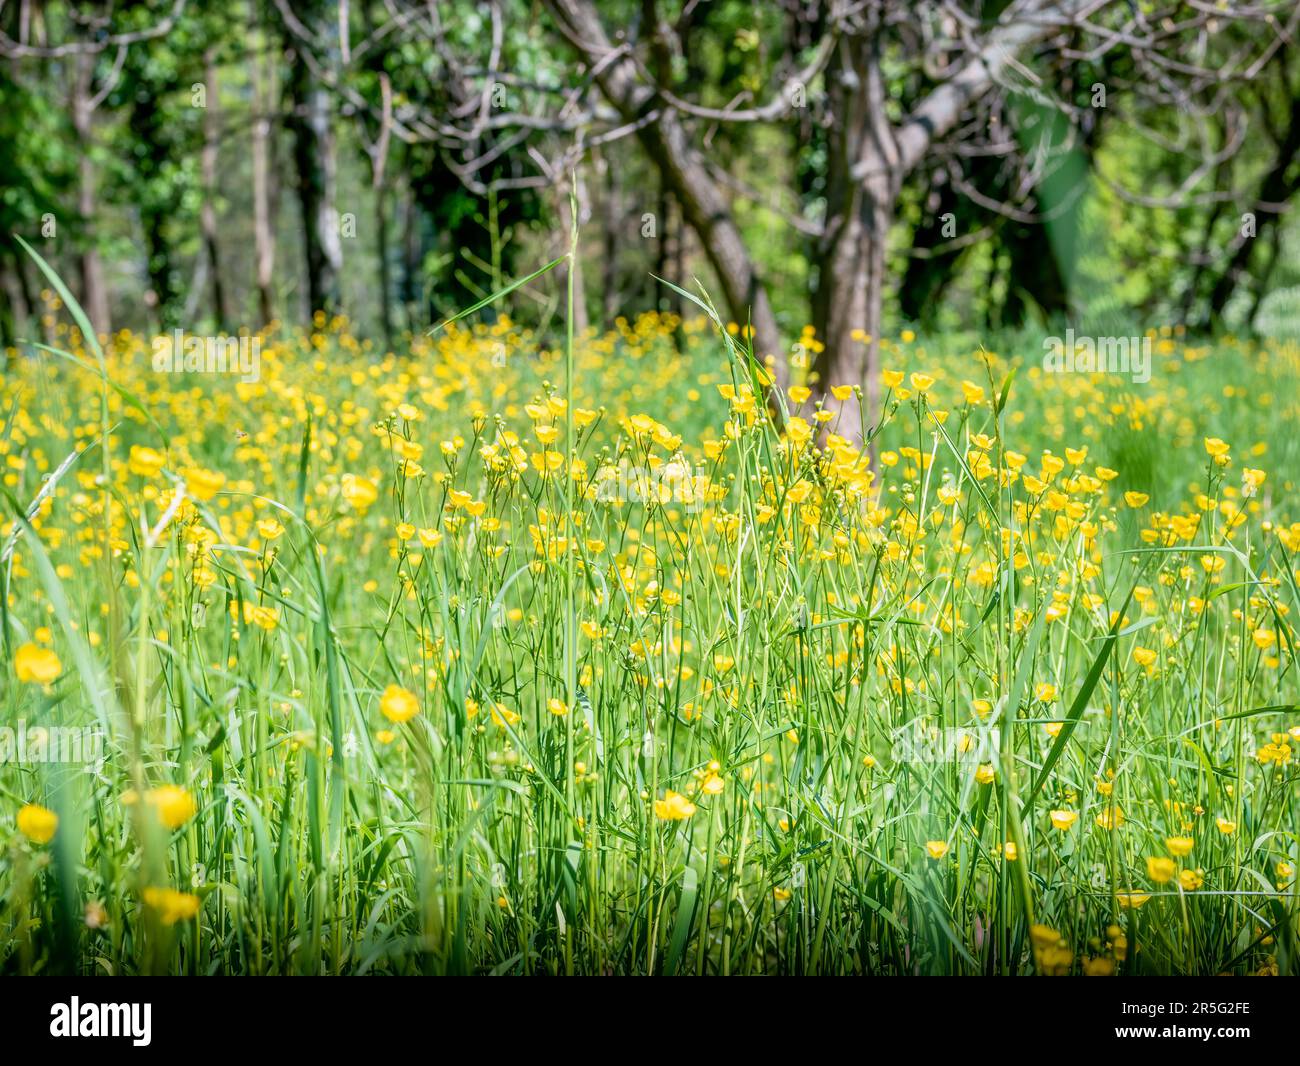 Spring landscape with a field full of small yellow Ranunculus repens buttercup flowers. Stock Photo